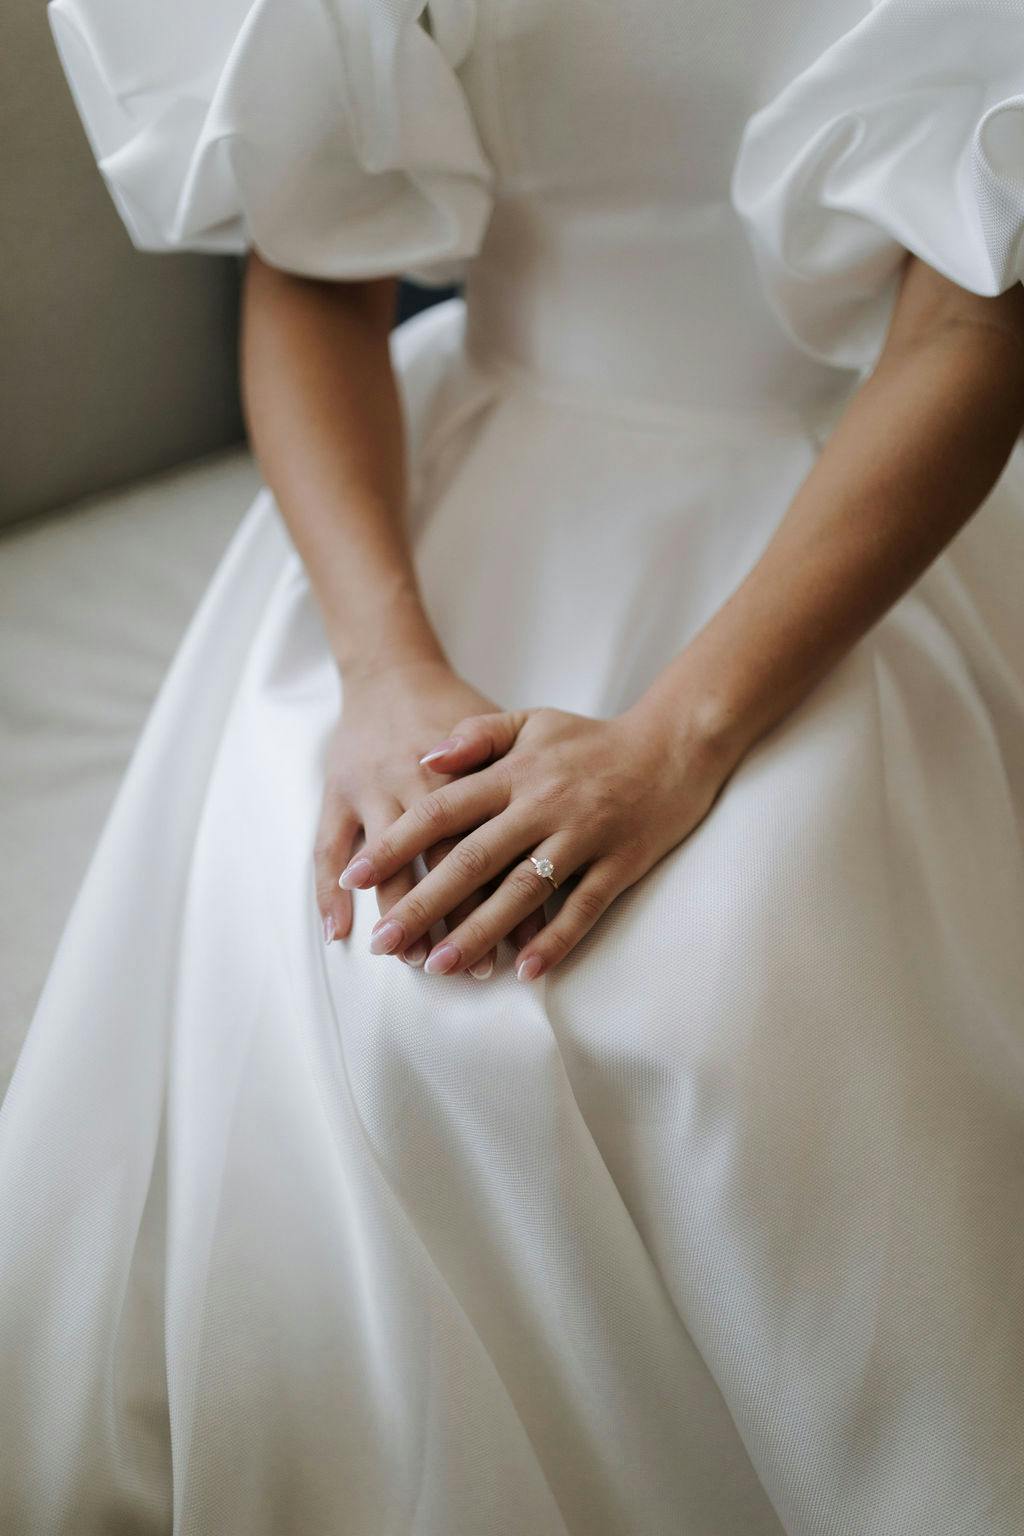 A bride wearing a white dress with puffed sleeves rests her hands on her lap, showcasing a simple yet elegant engagement ring on her finger.